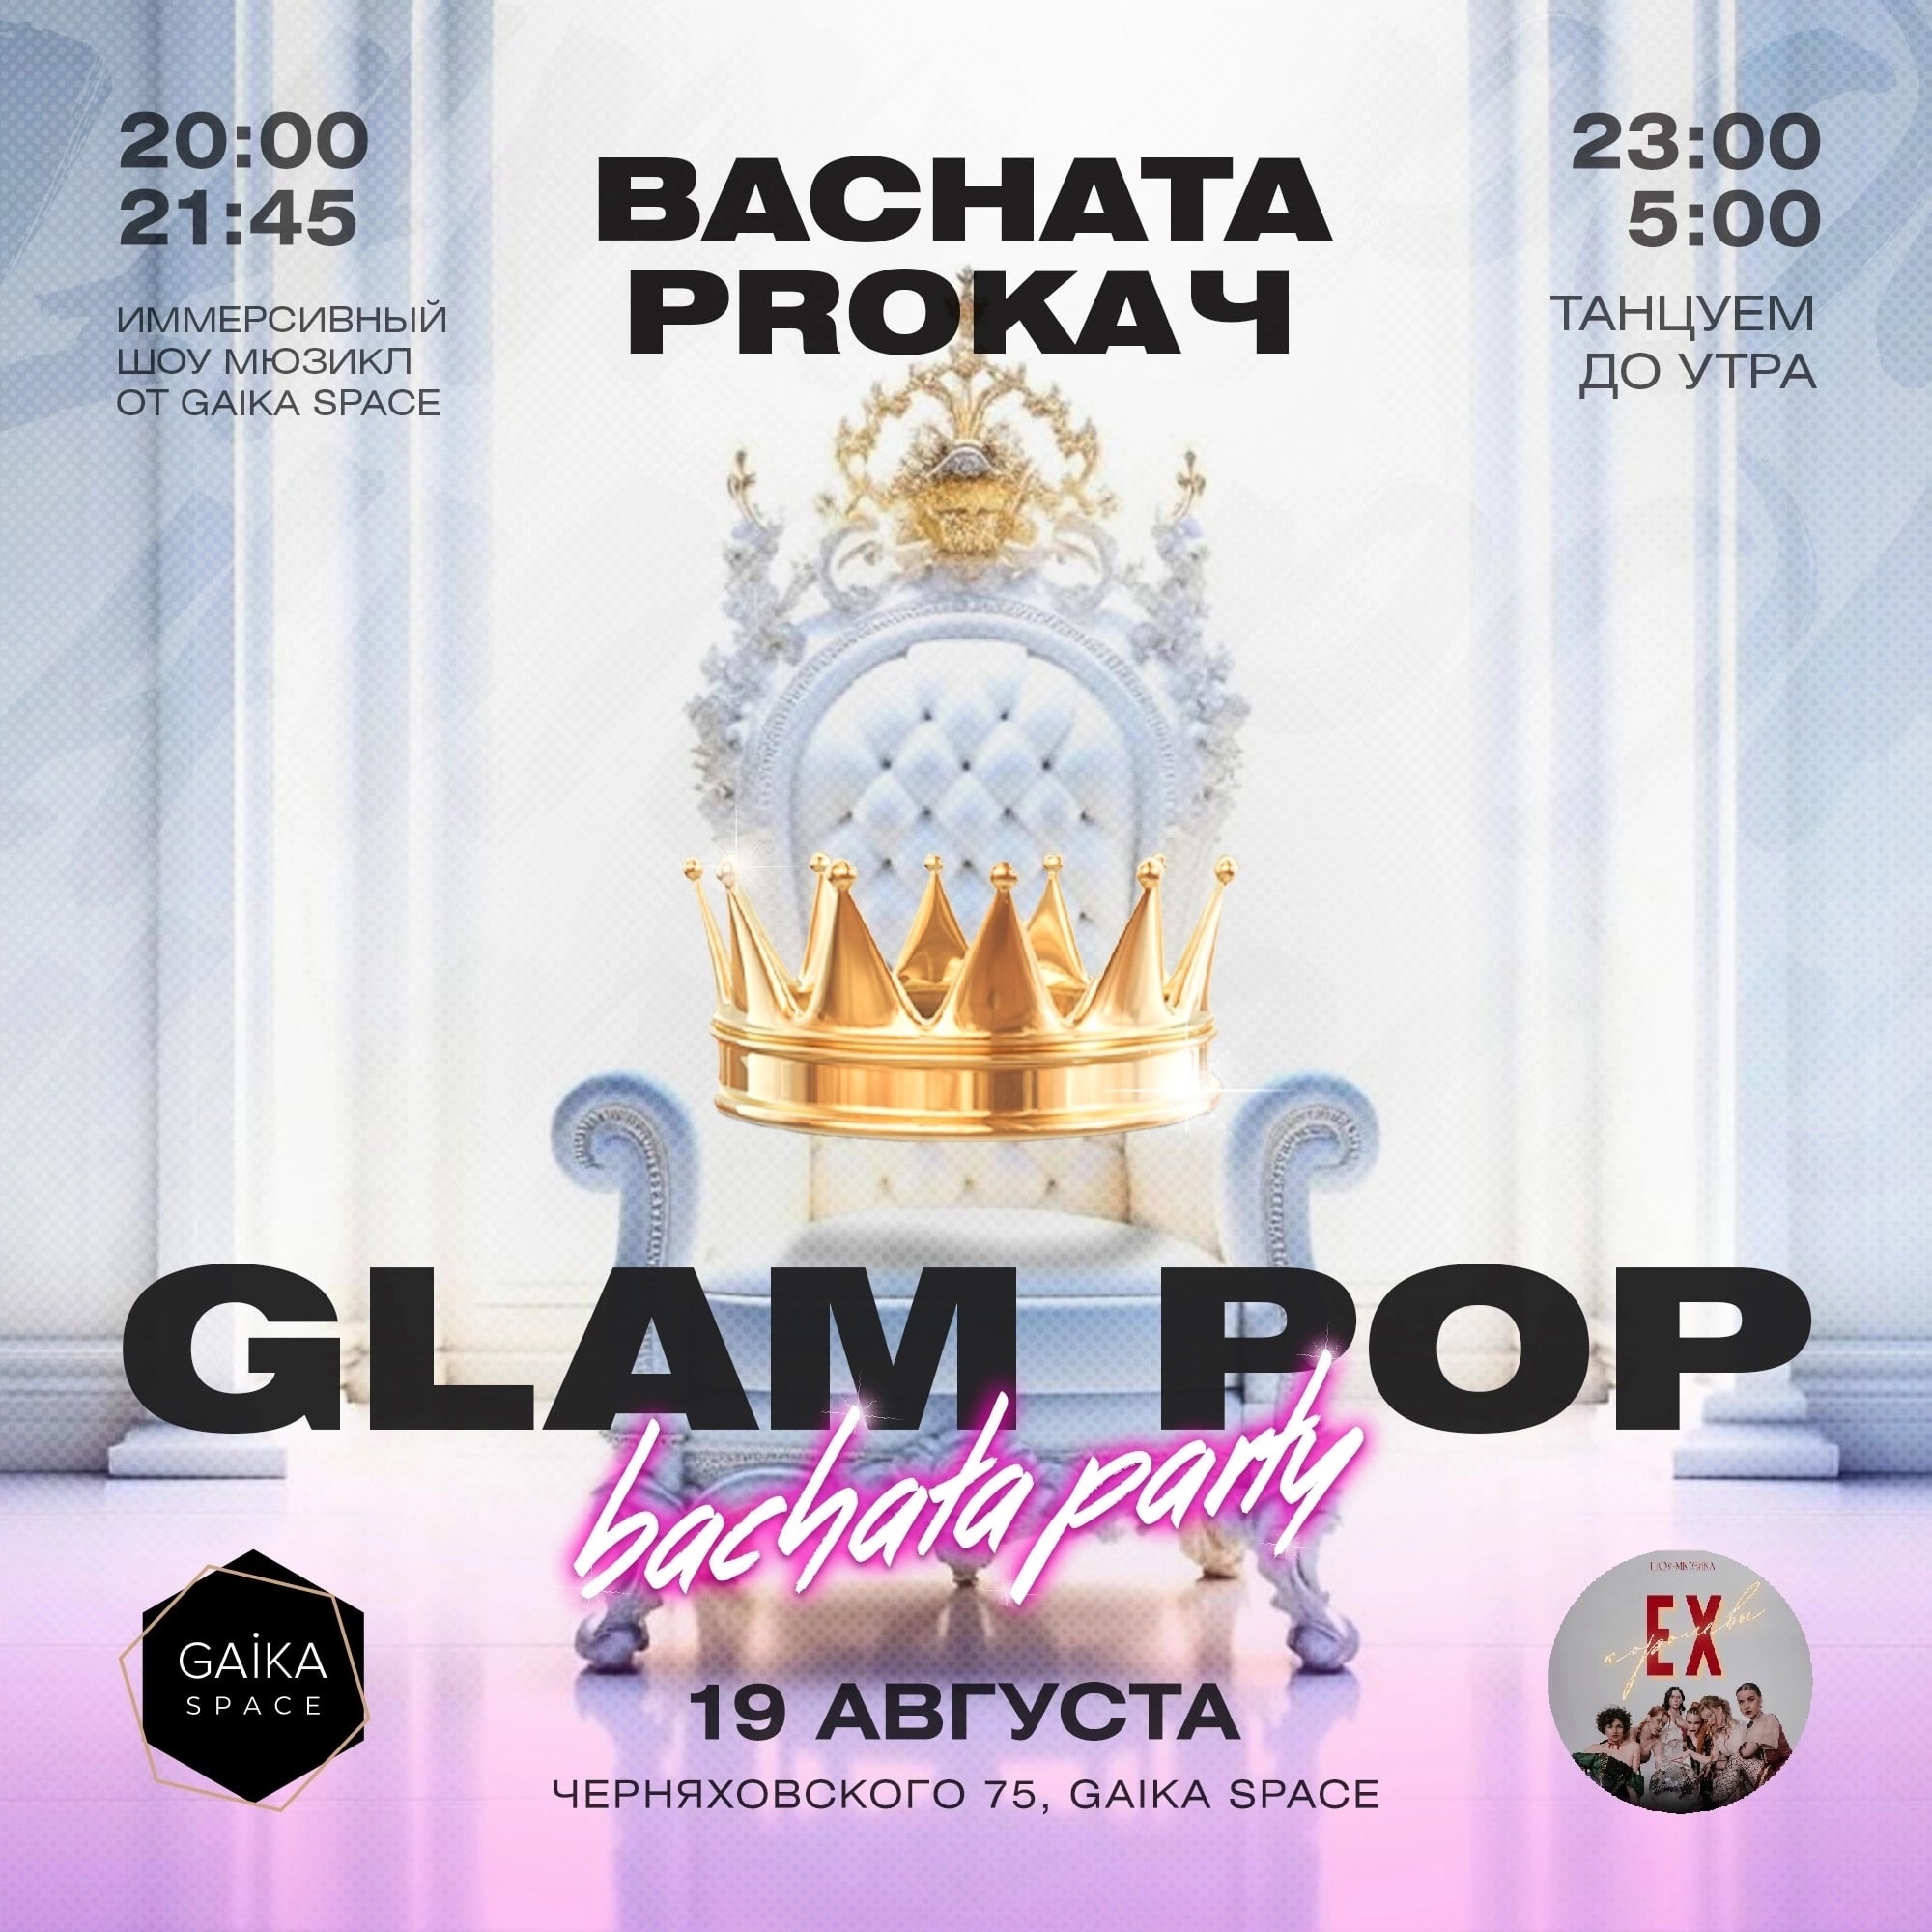 Bachata Proкач GLAM POP PARTY 2023